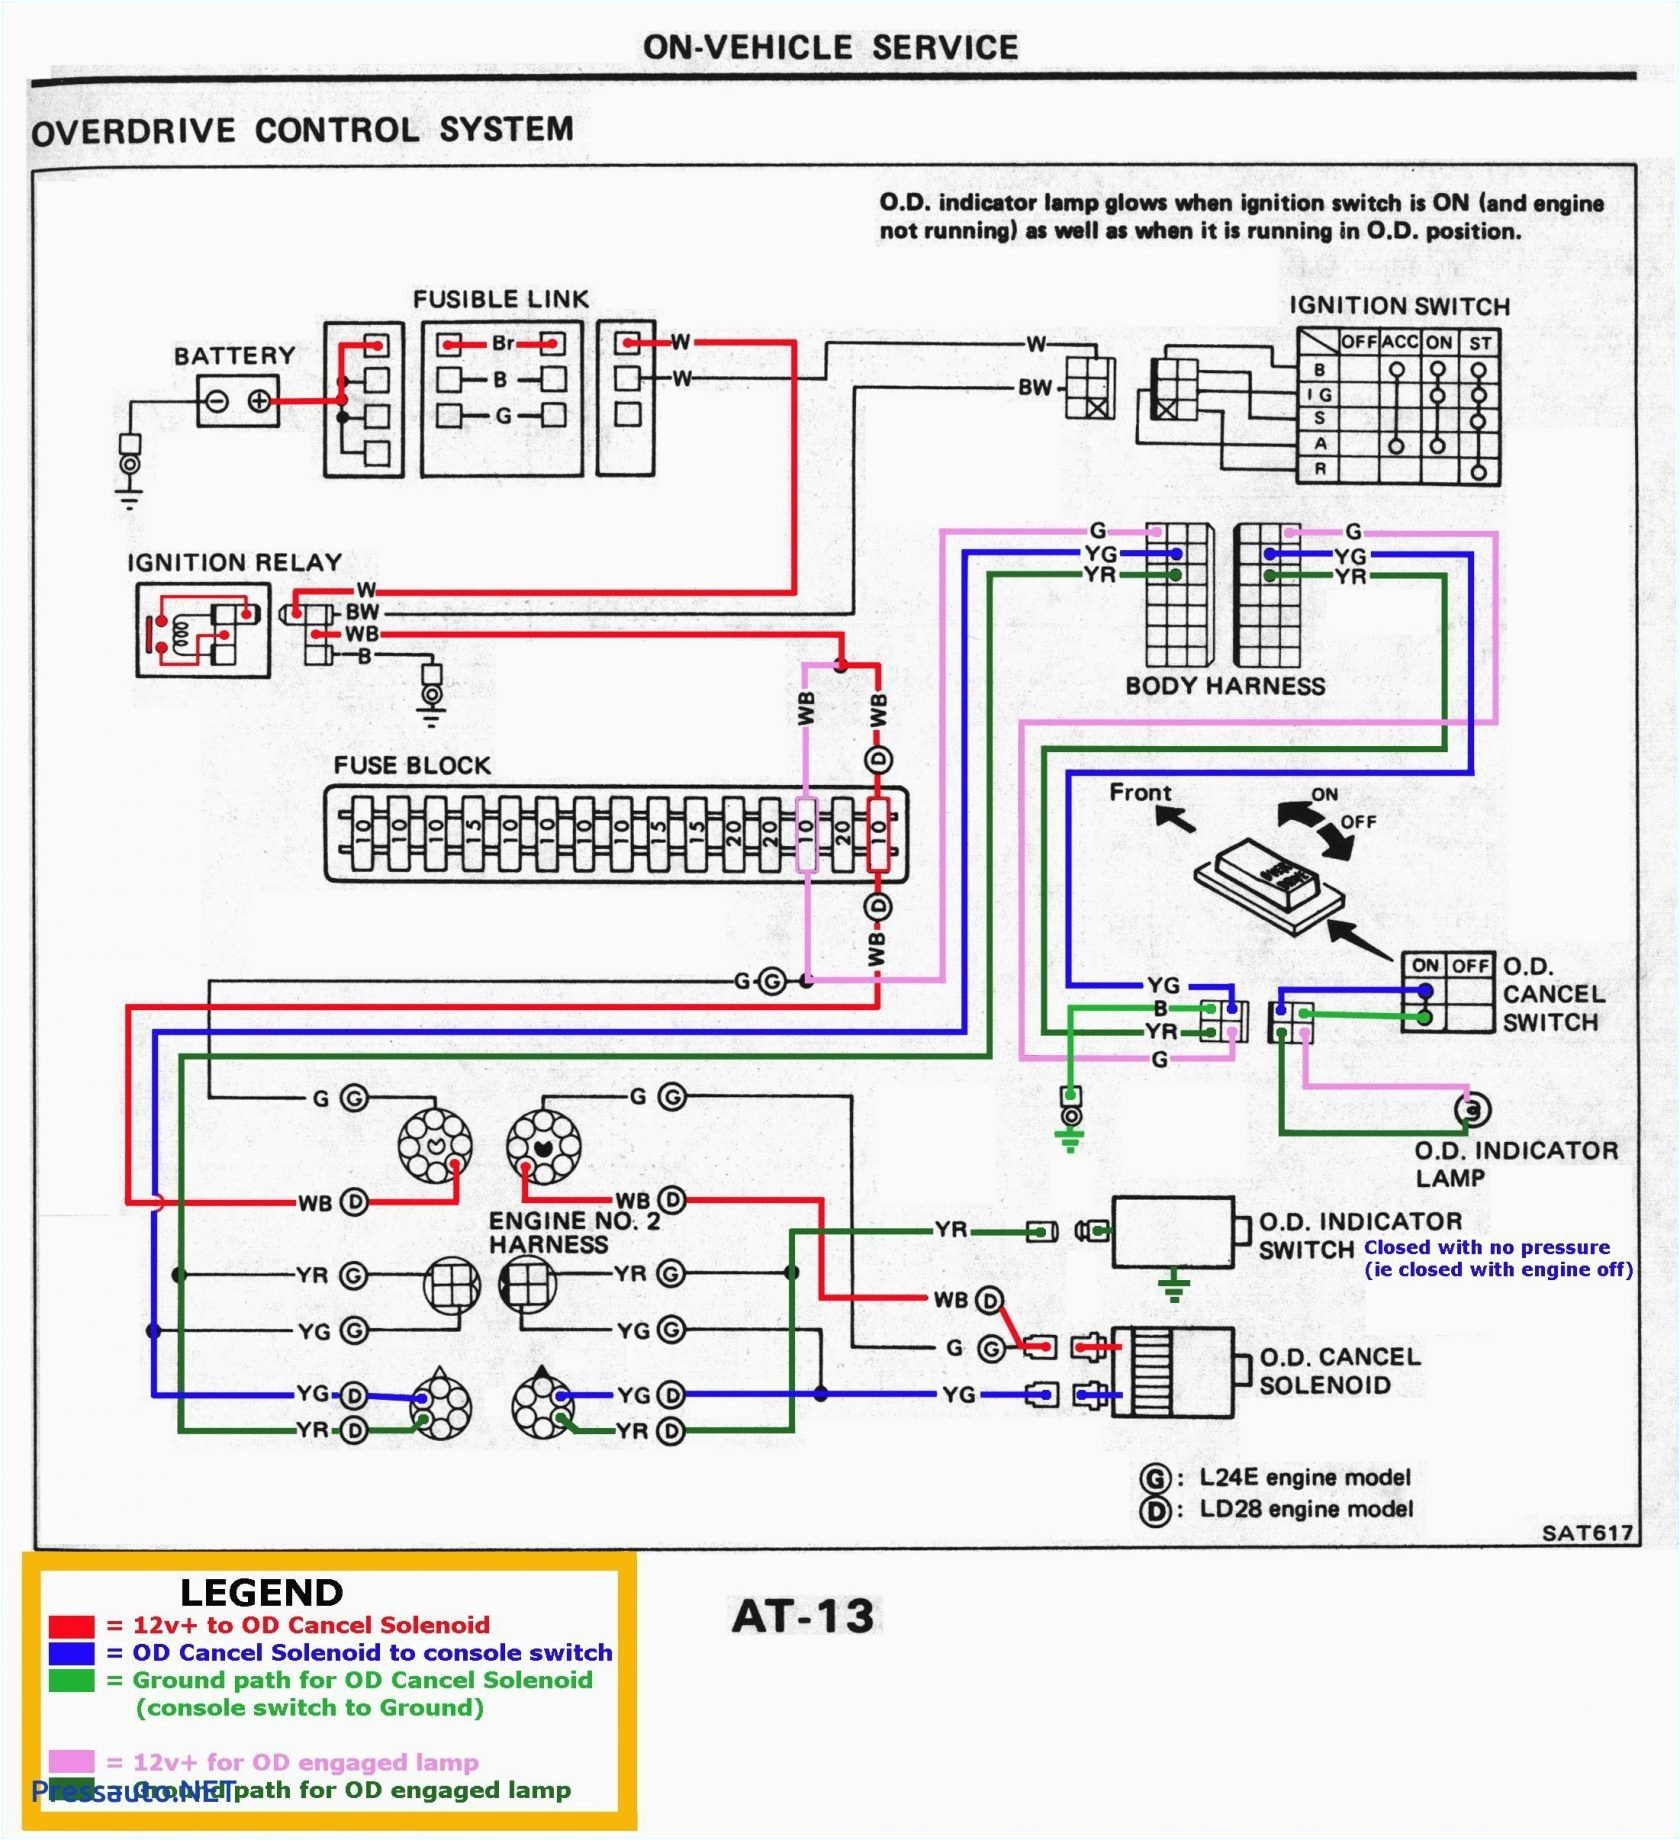 wiring diagram for street rod wiring diagram inside a street rod wiring schematic wiring diagram centre